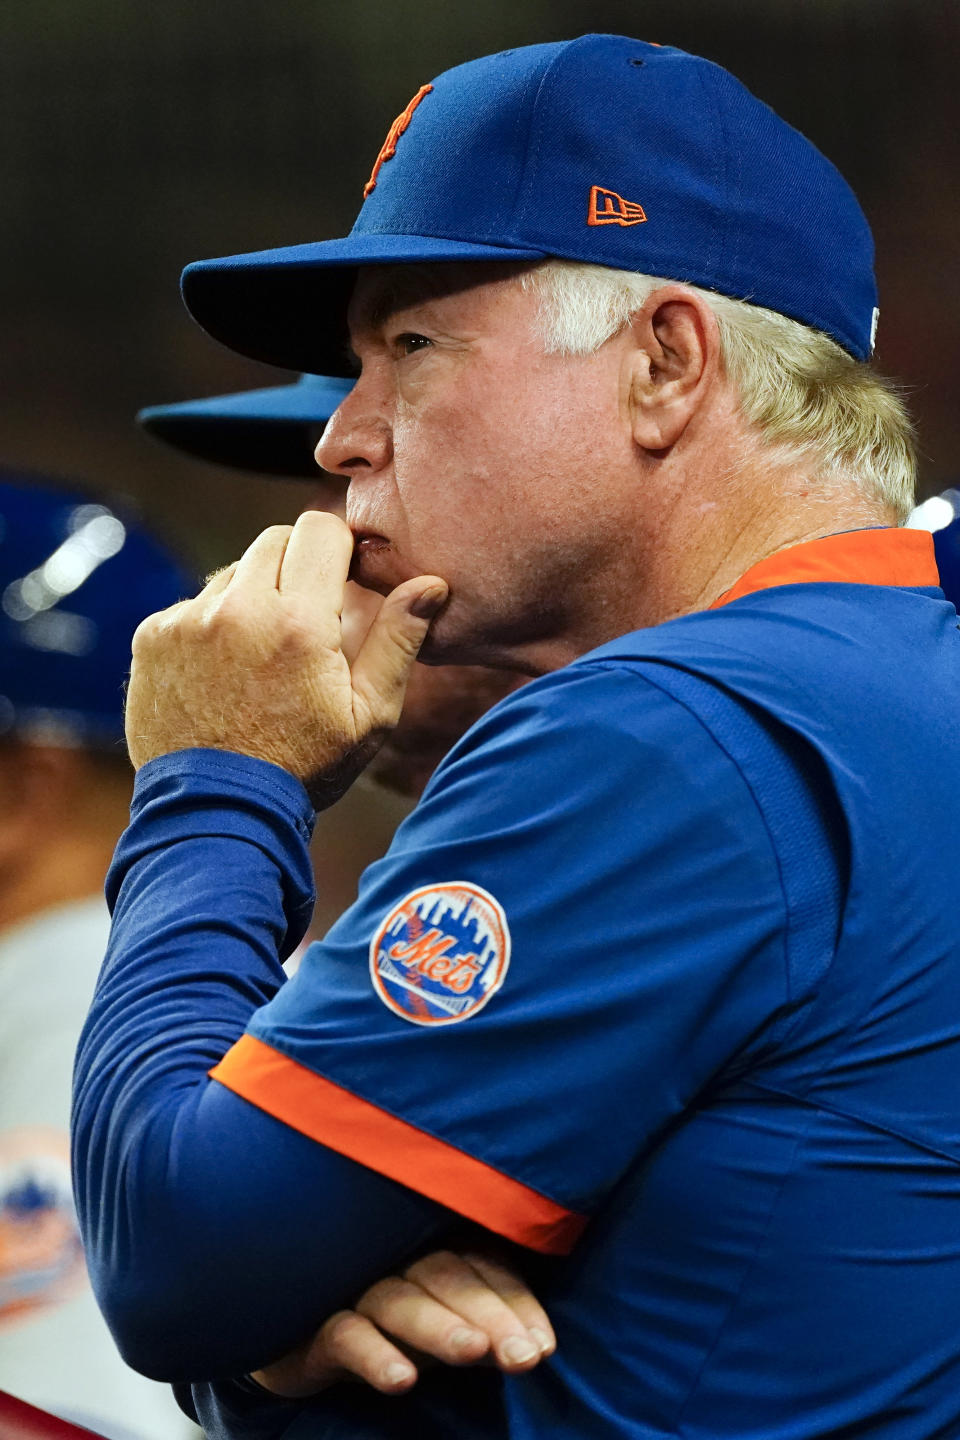 New York Mets manager Buck Showalter watches from the dugout during the fourth inning of the team's baseball game against the Atlanta Braves on Monday, Aug. 15, 2022, in Atlanta. (AP Photo/John Bazemore)